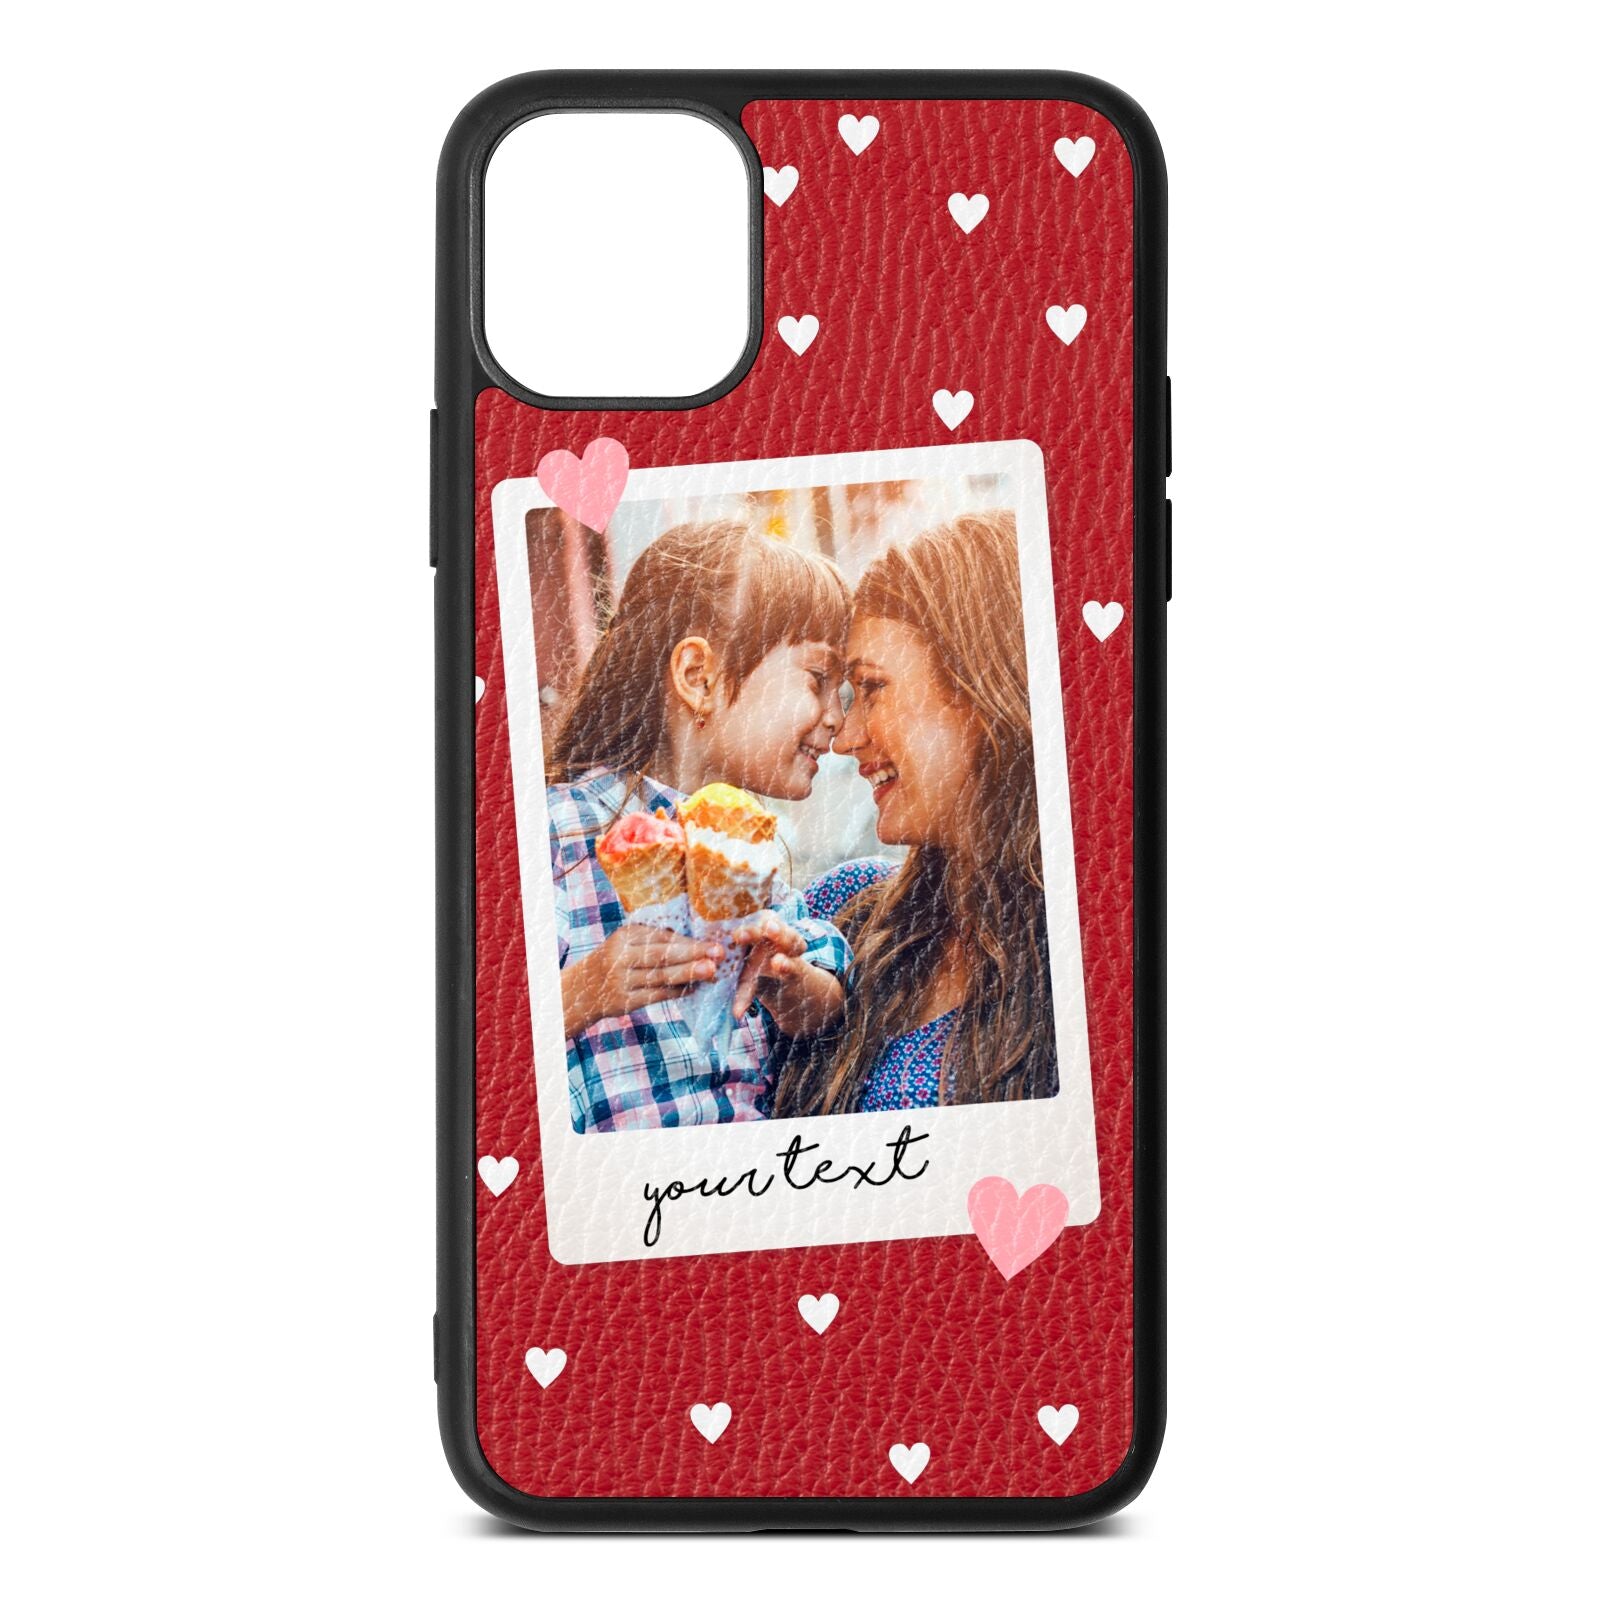 Personalised Photo Love Hearts Red Pebble Leather iPhone 11 Pro Max Case